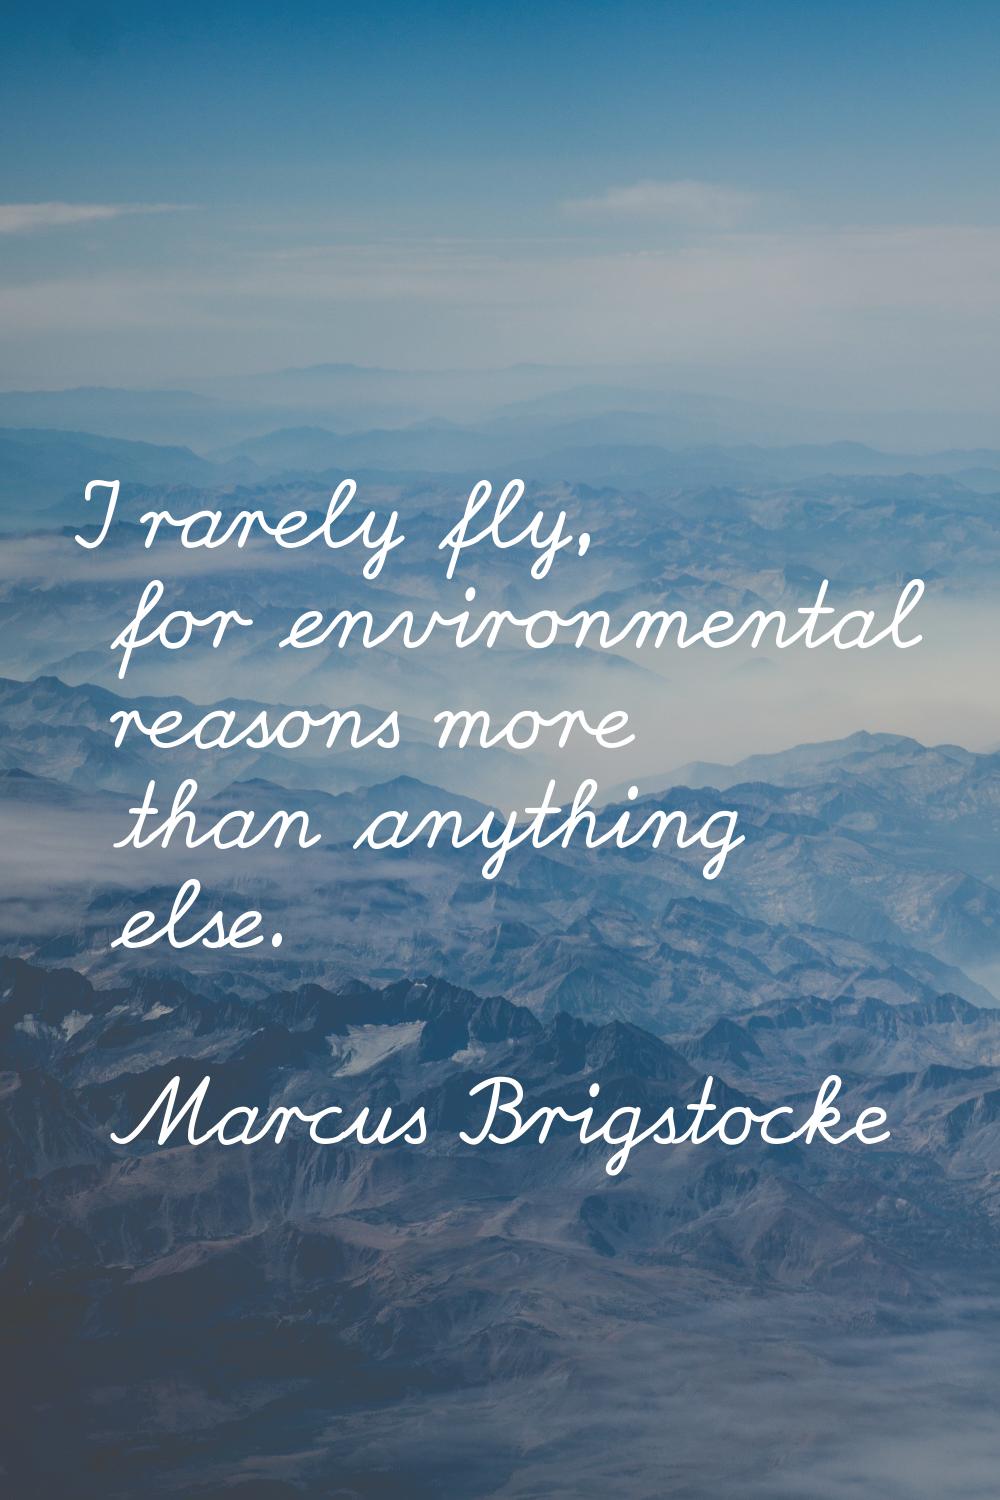 I rarely fly, for environmental reasons more than anything else.